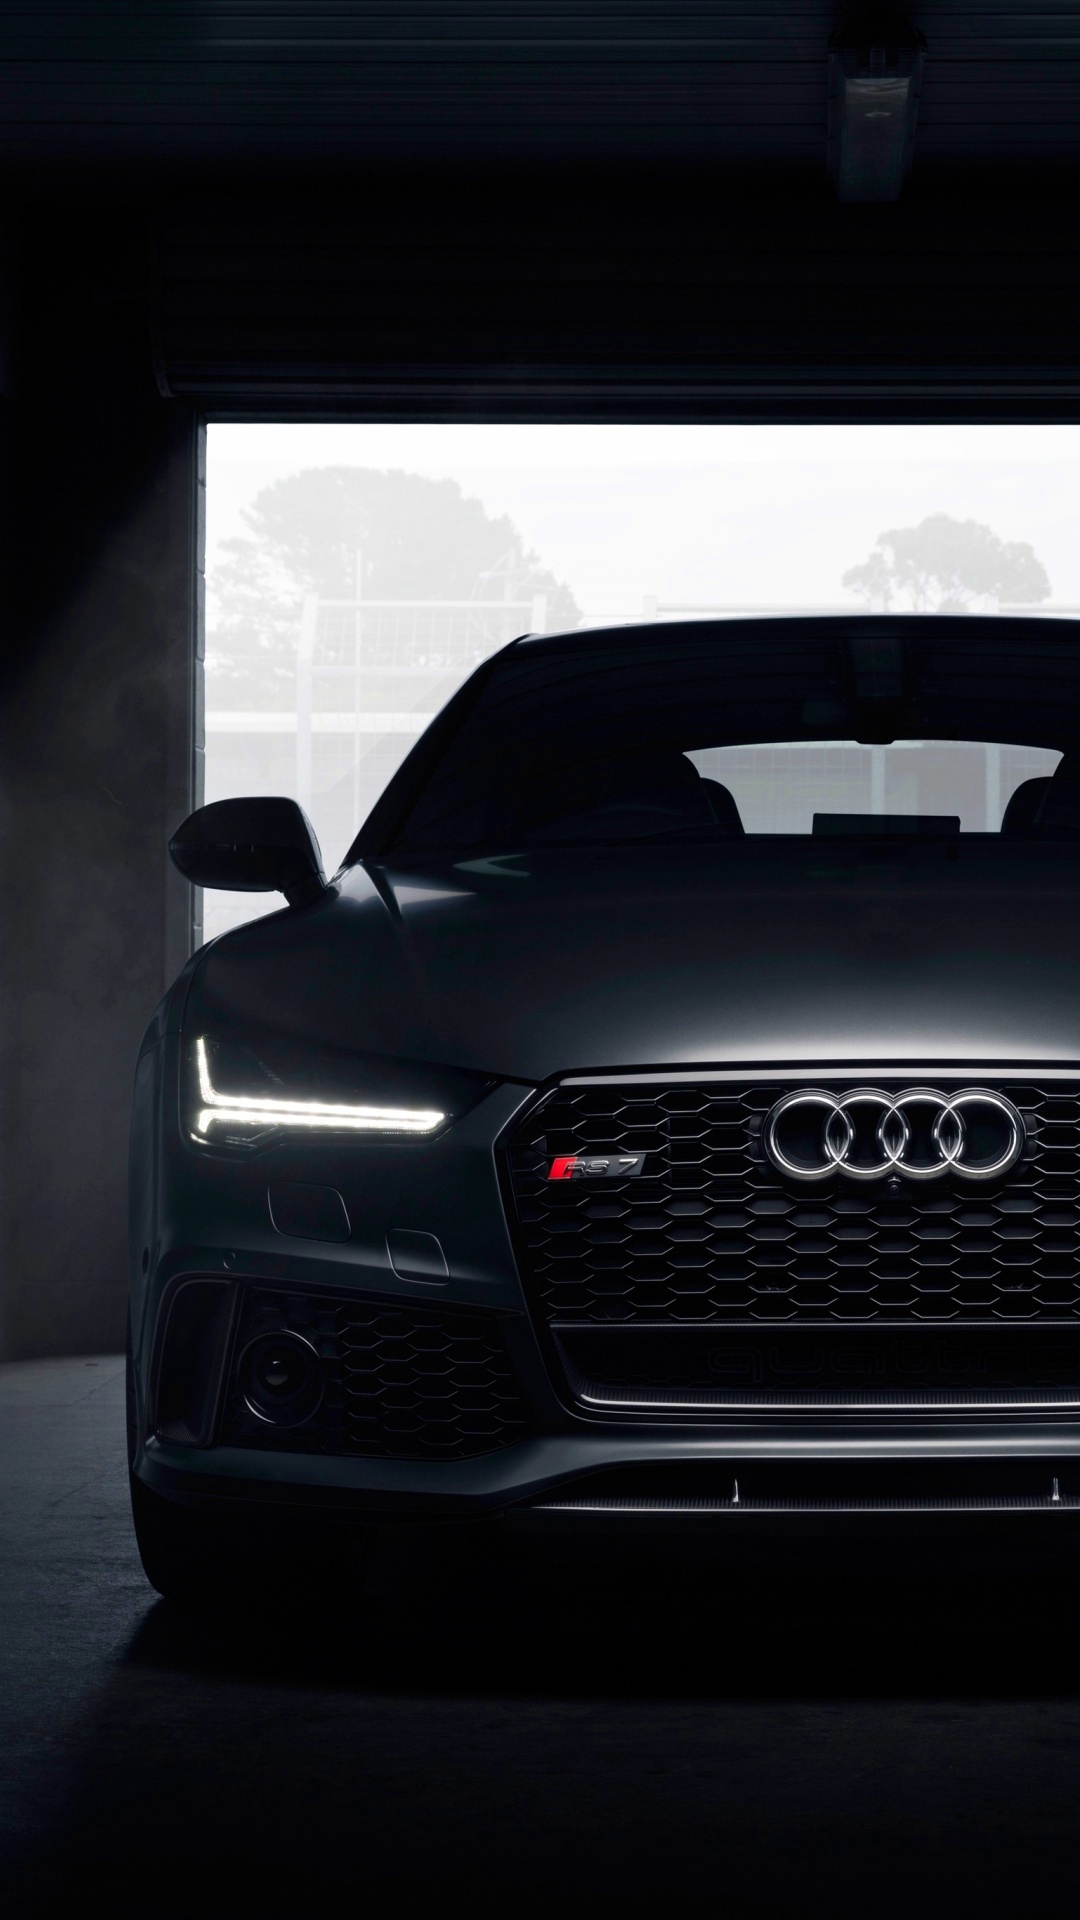 New Android Wallpaper Audi Rs 7 Sportback Au Spec 15 Android Wallpaper